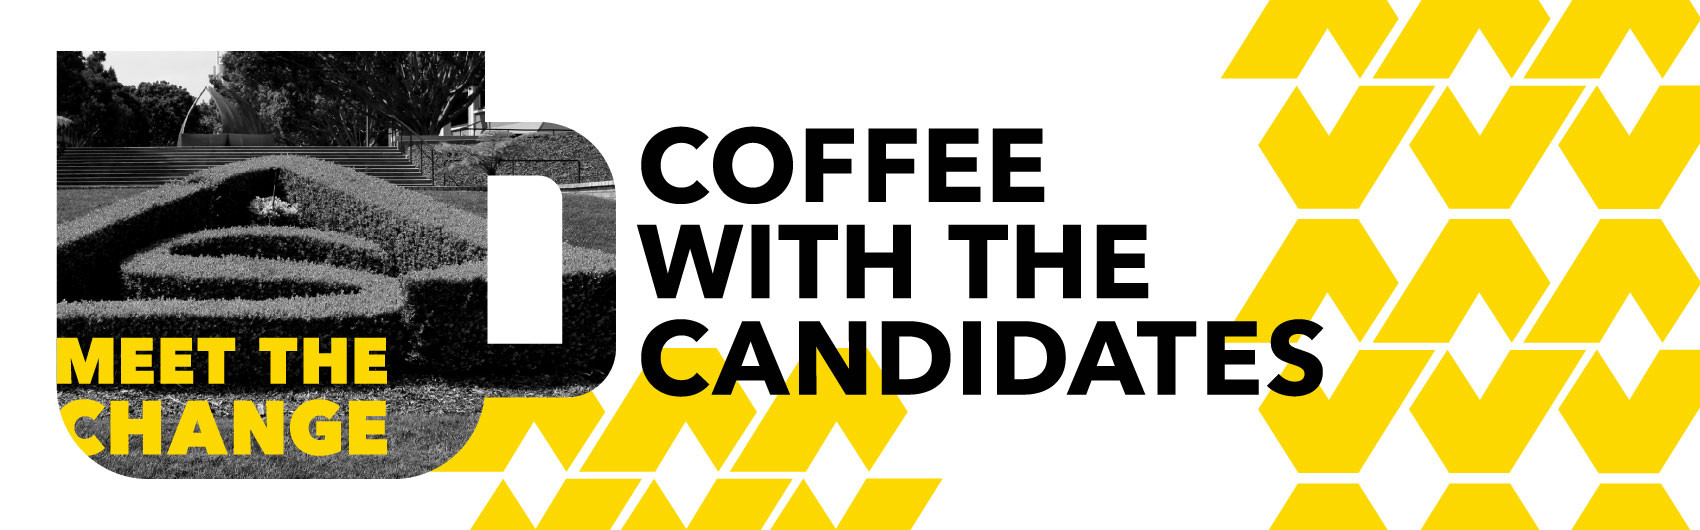 Coffee With The Candidates Banner